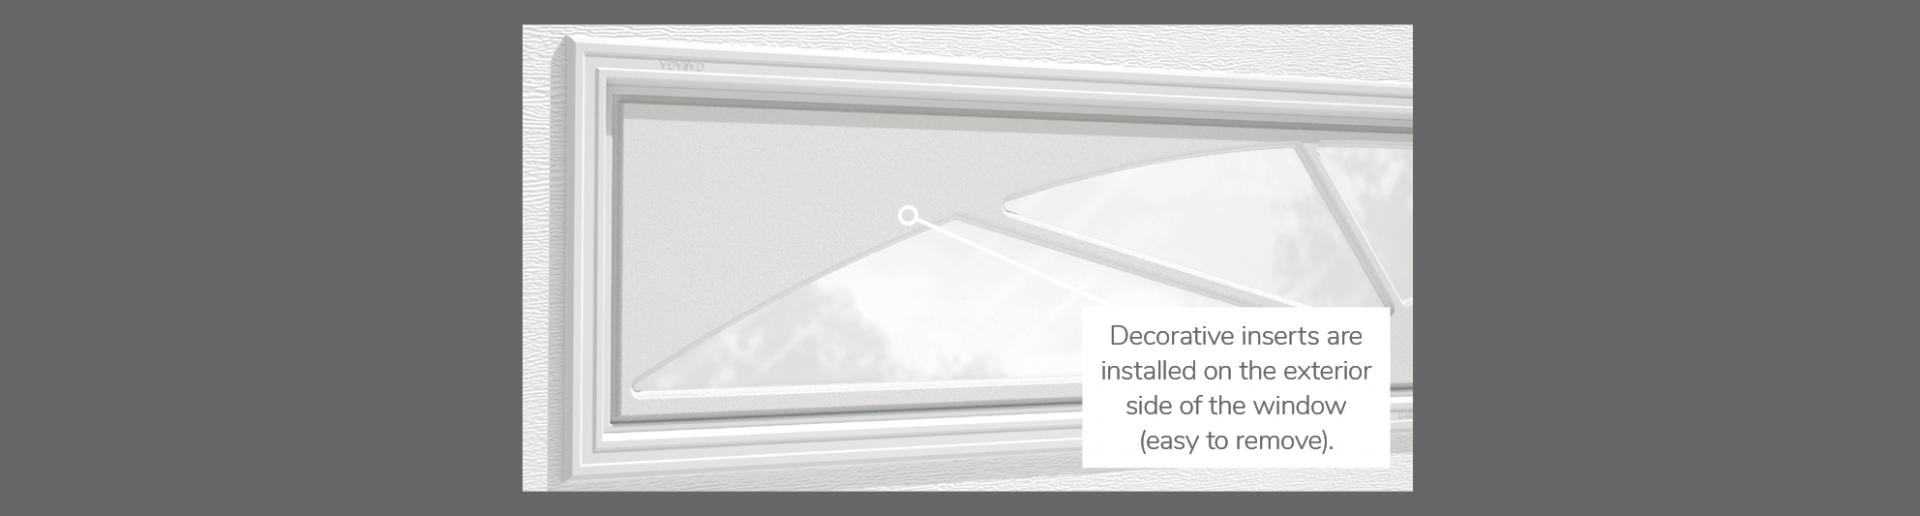 Williamsburg Decorative Insert, 40" x 13", available for door 2 layers - Polystyrene and Non-insulated